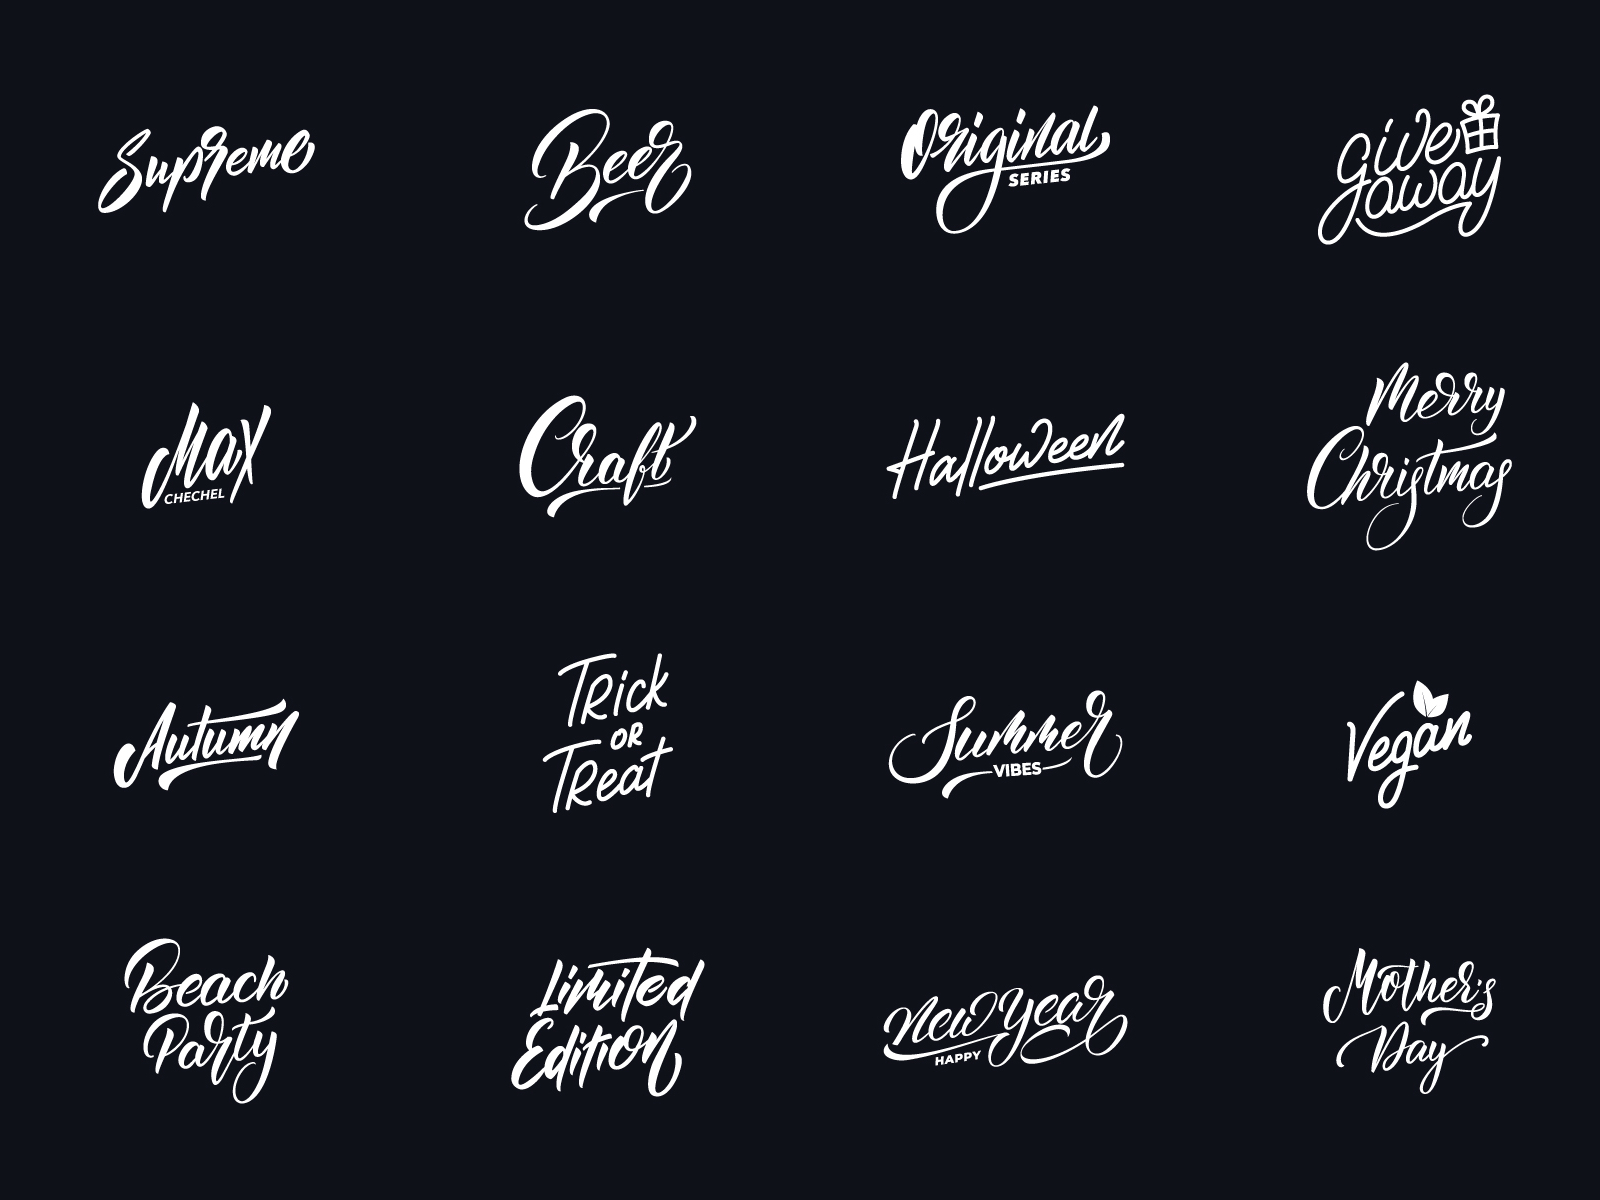 Lettering logofolio vol 1 by Max Letters on Dribbble